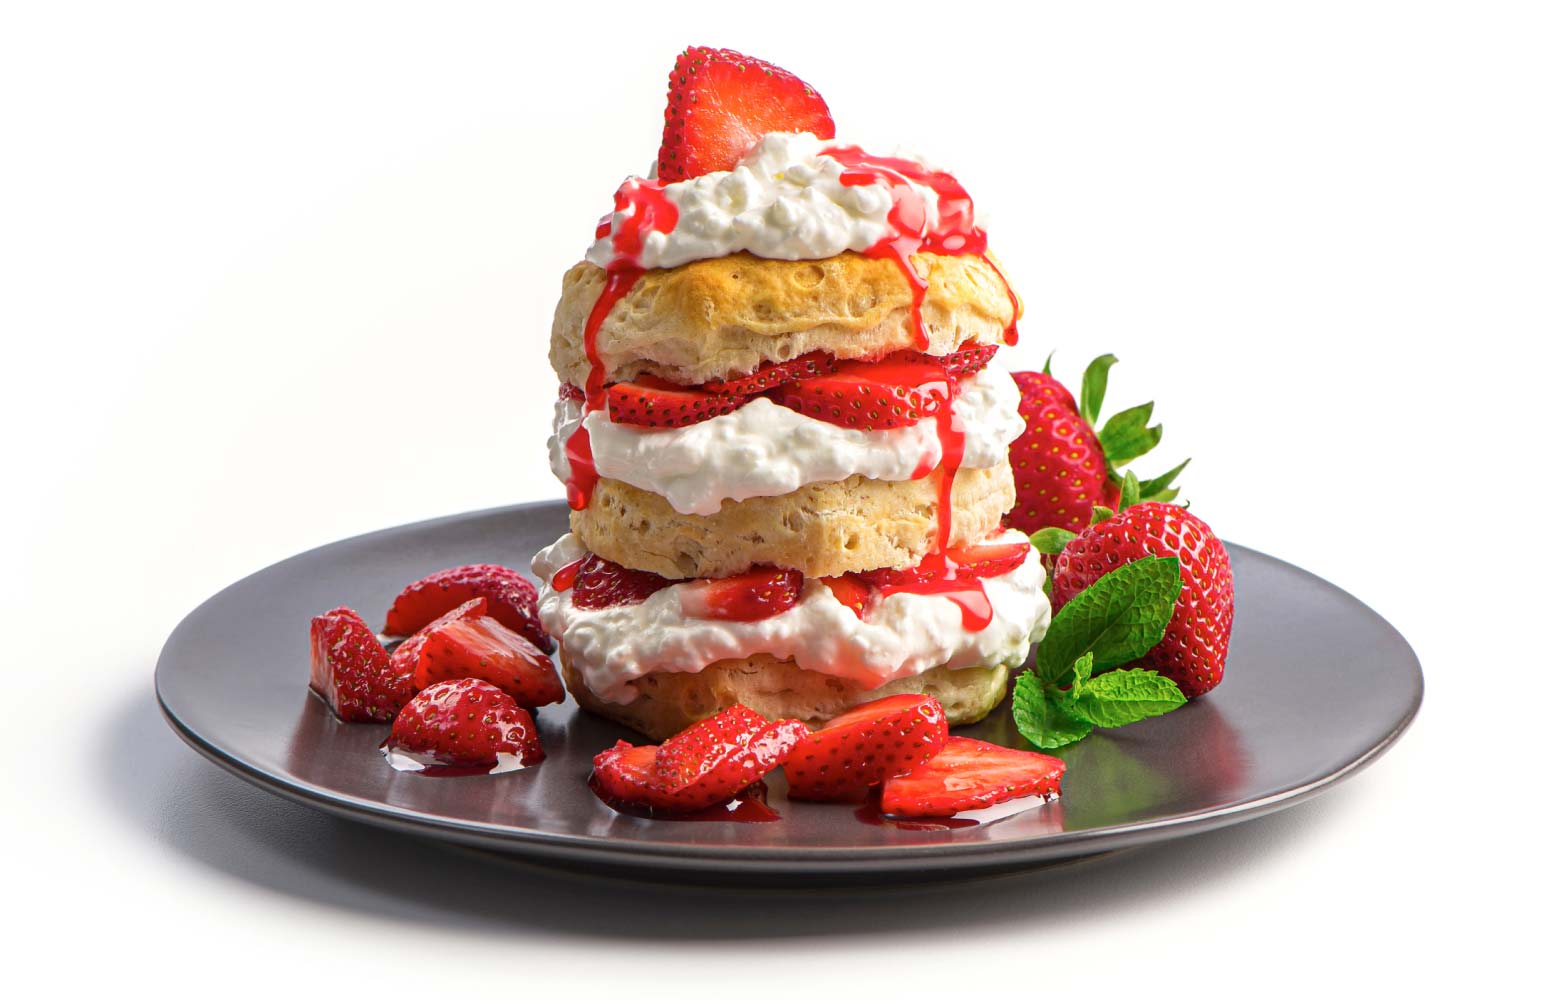 Photograph of a strawberry shortcake made with Friendship Dairies cottage cheese.